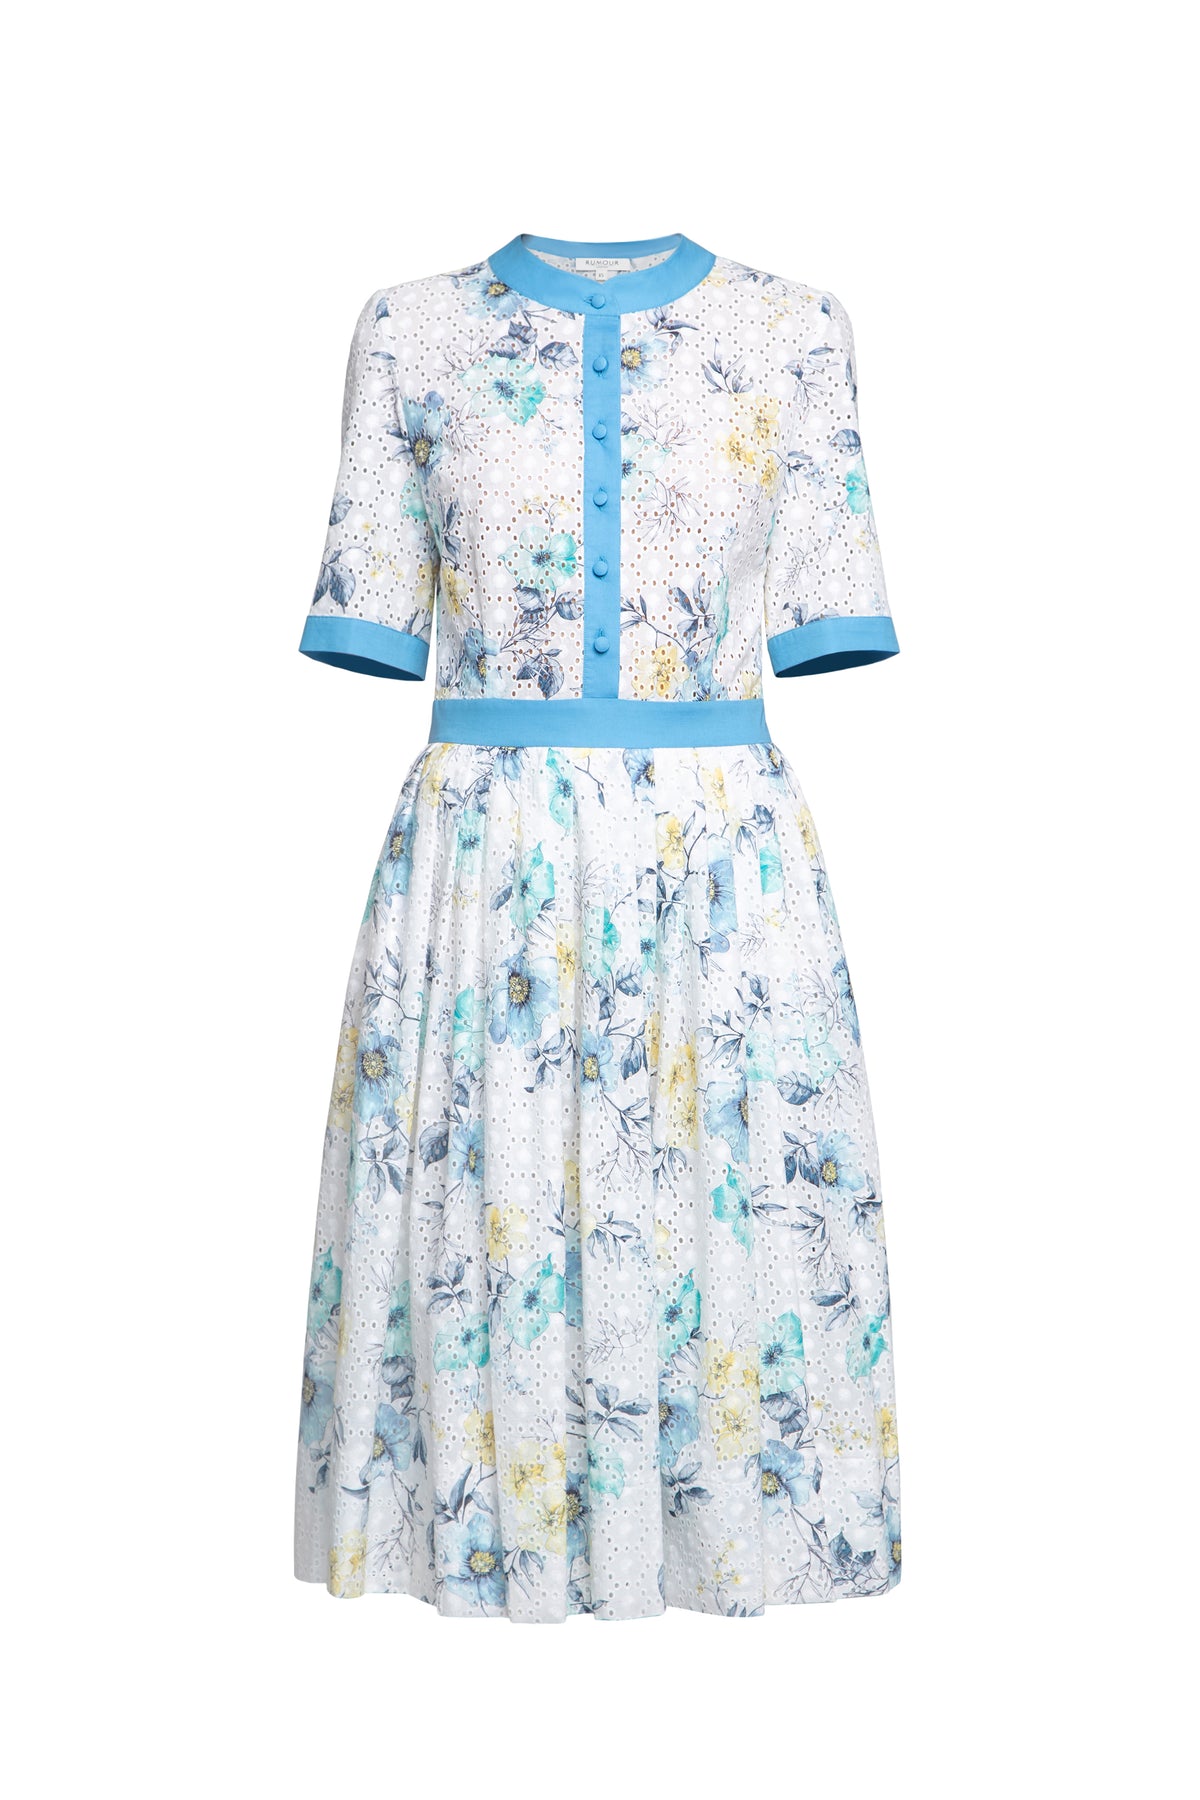 Floral Print Broderie Anglaise Midi Dress in Blue